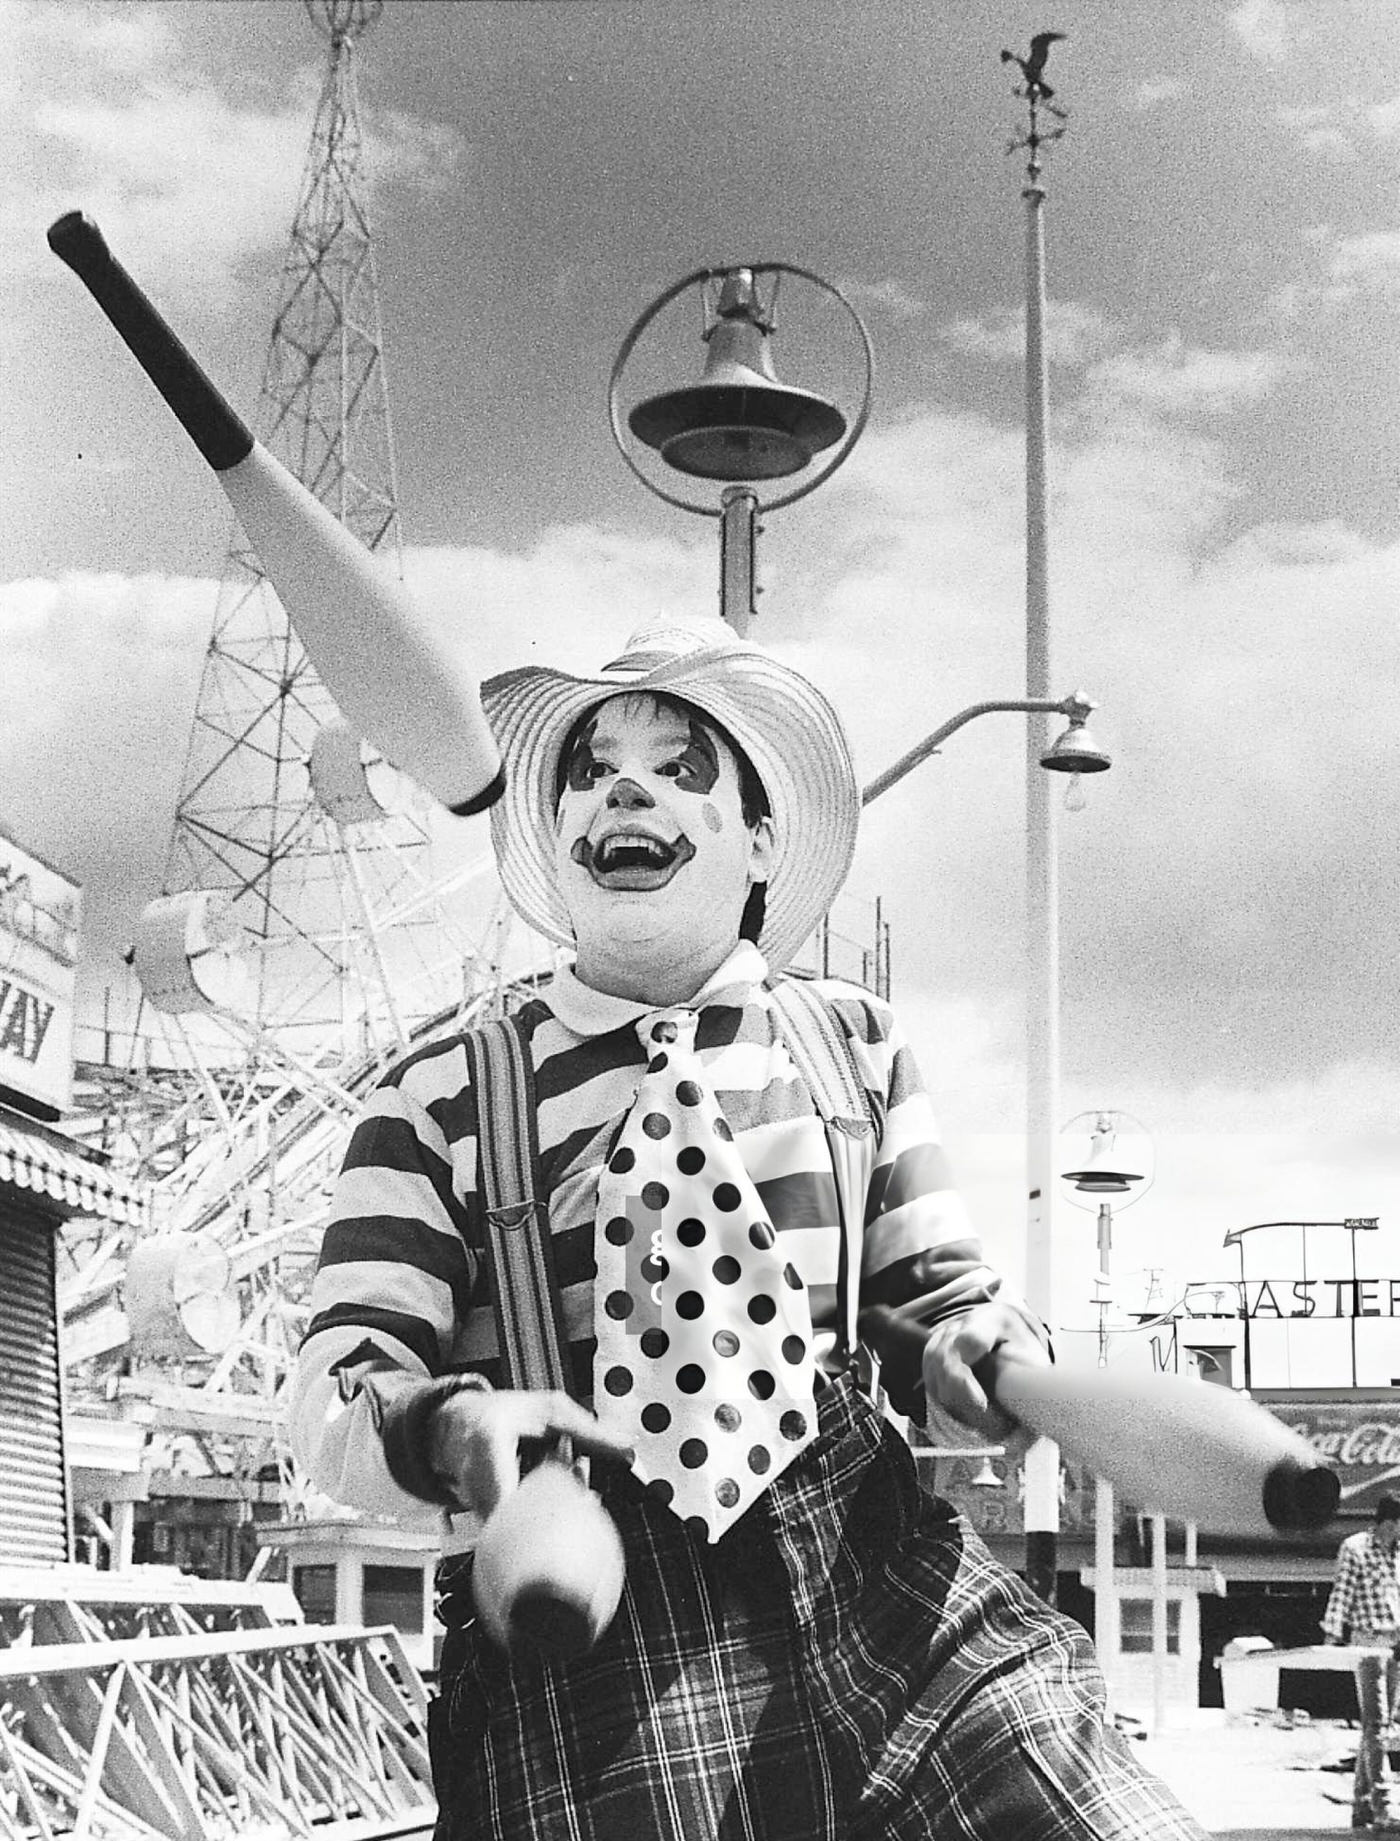 &Amp;Quot;Smiling Josh The Clown&Amp;Quot; Practices His Juggling Act For The Season'S Grand Opening Of Rockaways' Playland In Queens, 1984.